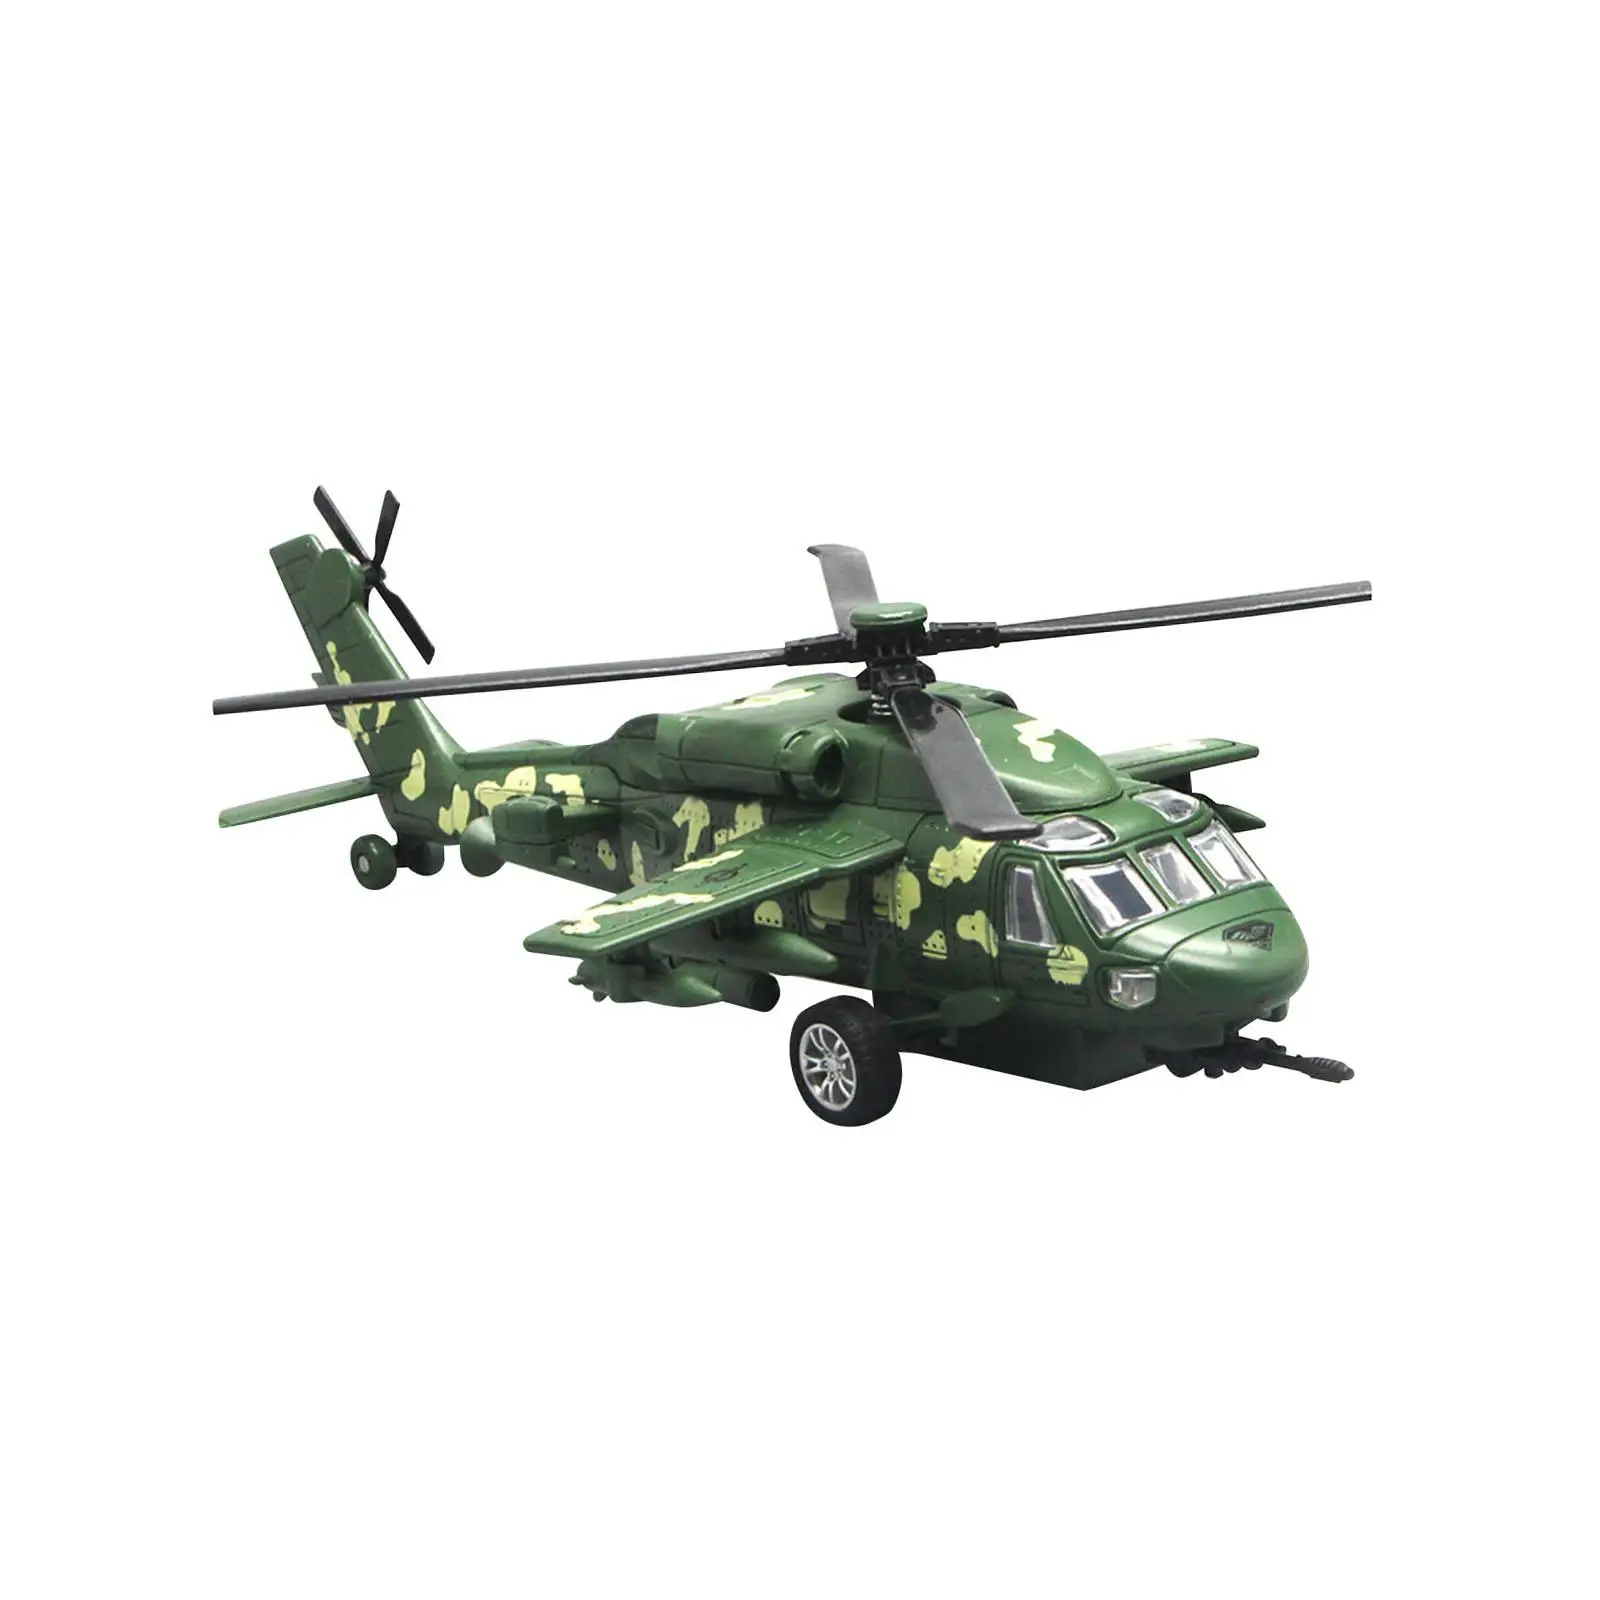 Diecast Helicopter Frication Powered Aircraft Collectables Simulation Crafts Miniature Model Tabletop Decoration Birthday Gifts